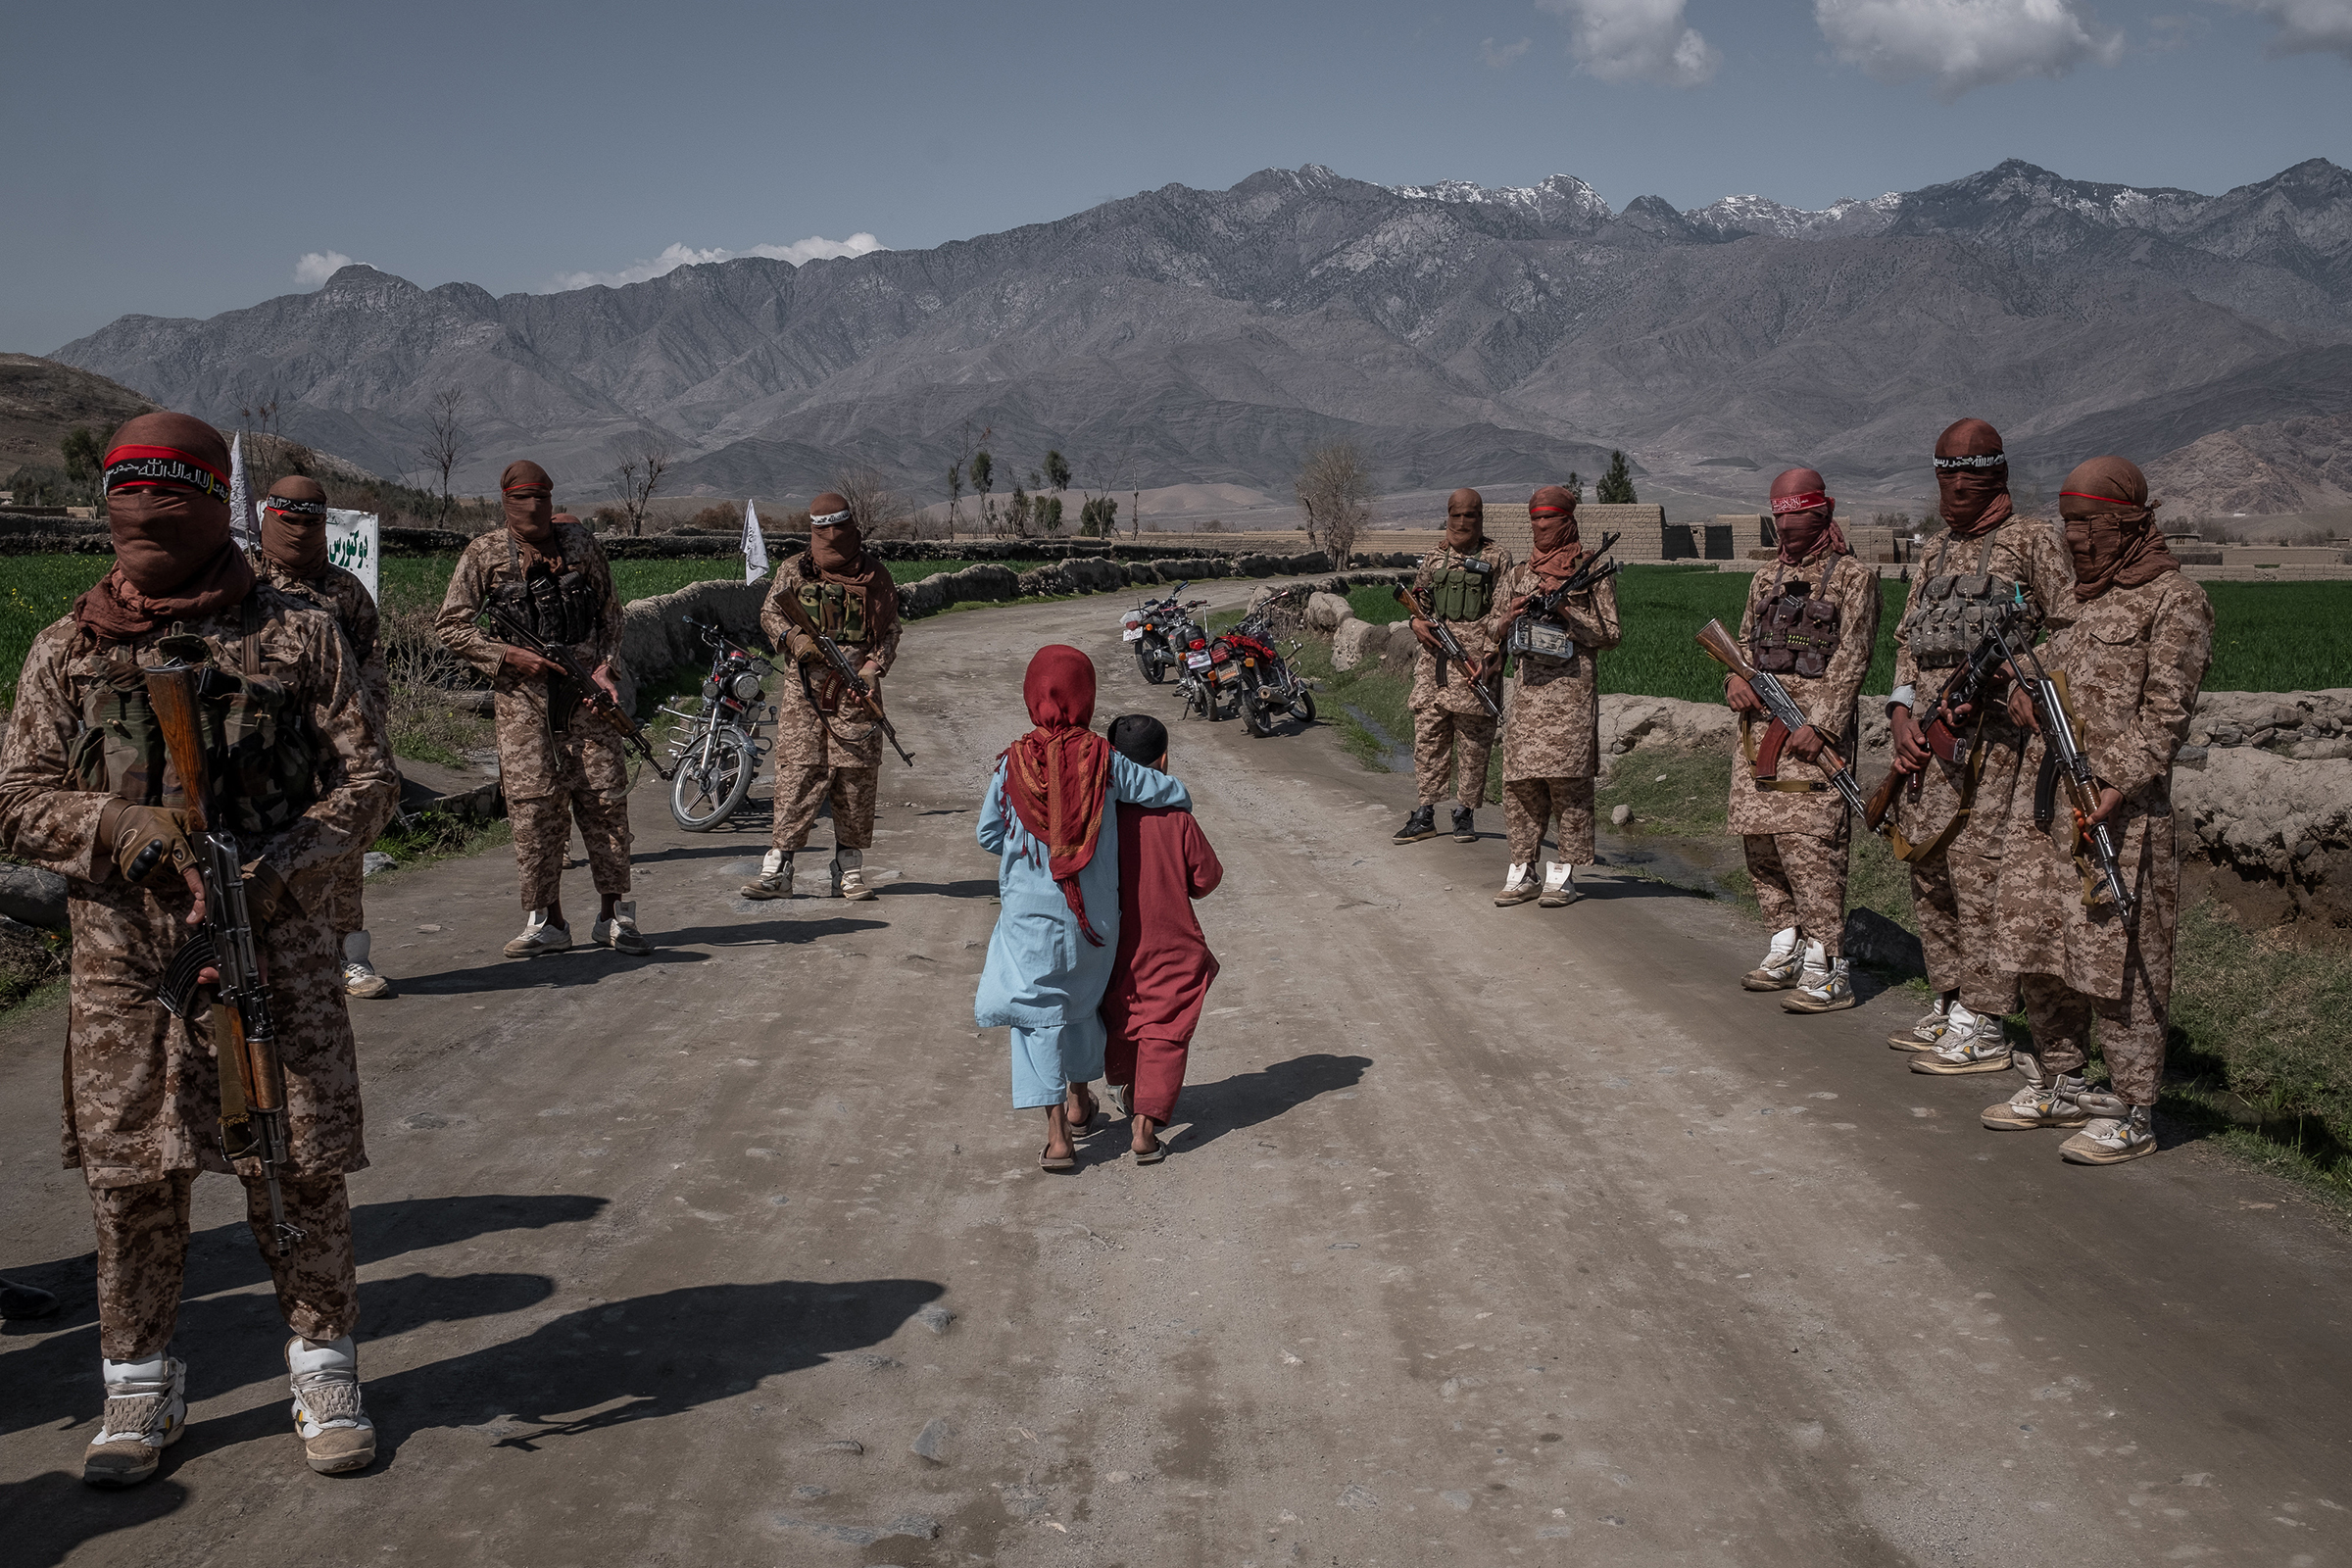 Two children pass members of a Taliban Red Unit, an elite force, in the Alingar District of Afghanistan's Laghman Province on March 13. (Jim Huylebroek—The New York Times/Redux)